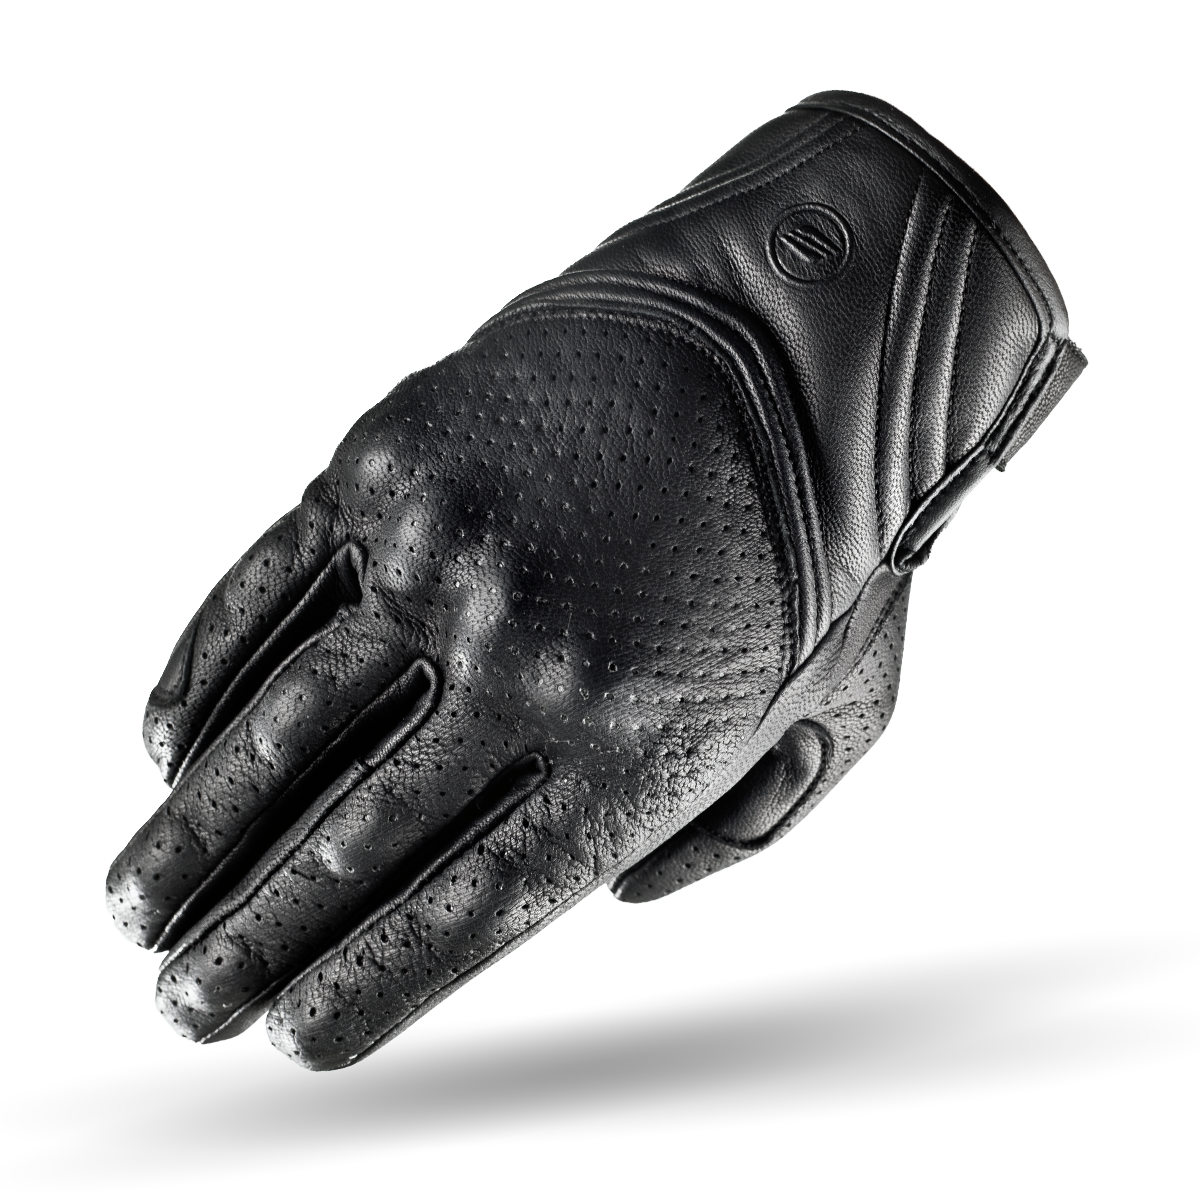 Black short leather female motorcycle glove from Shima